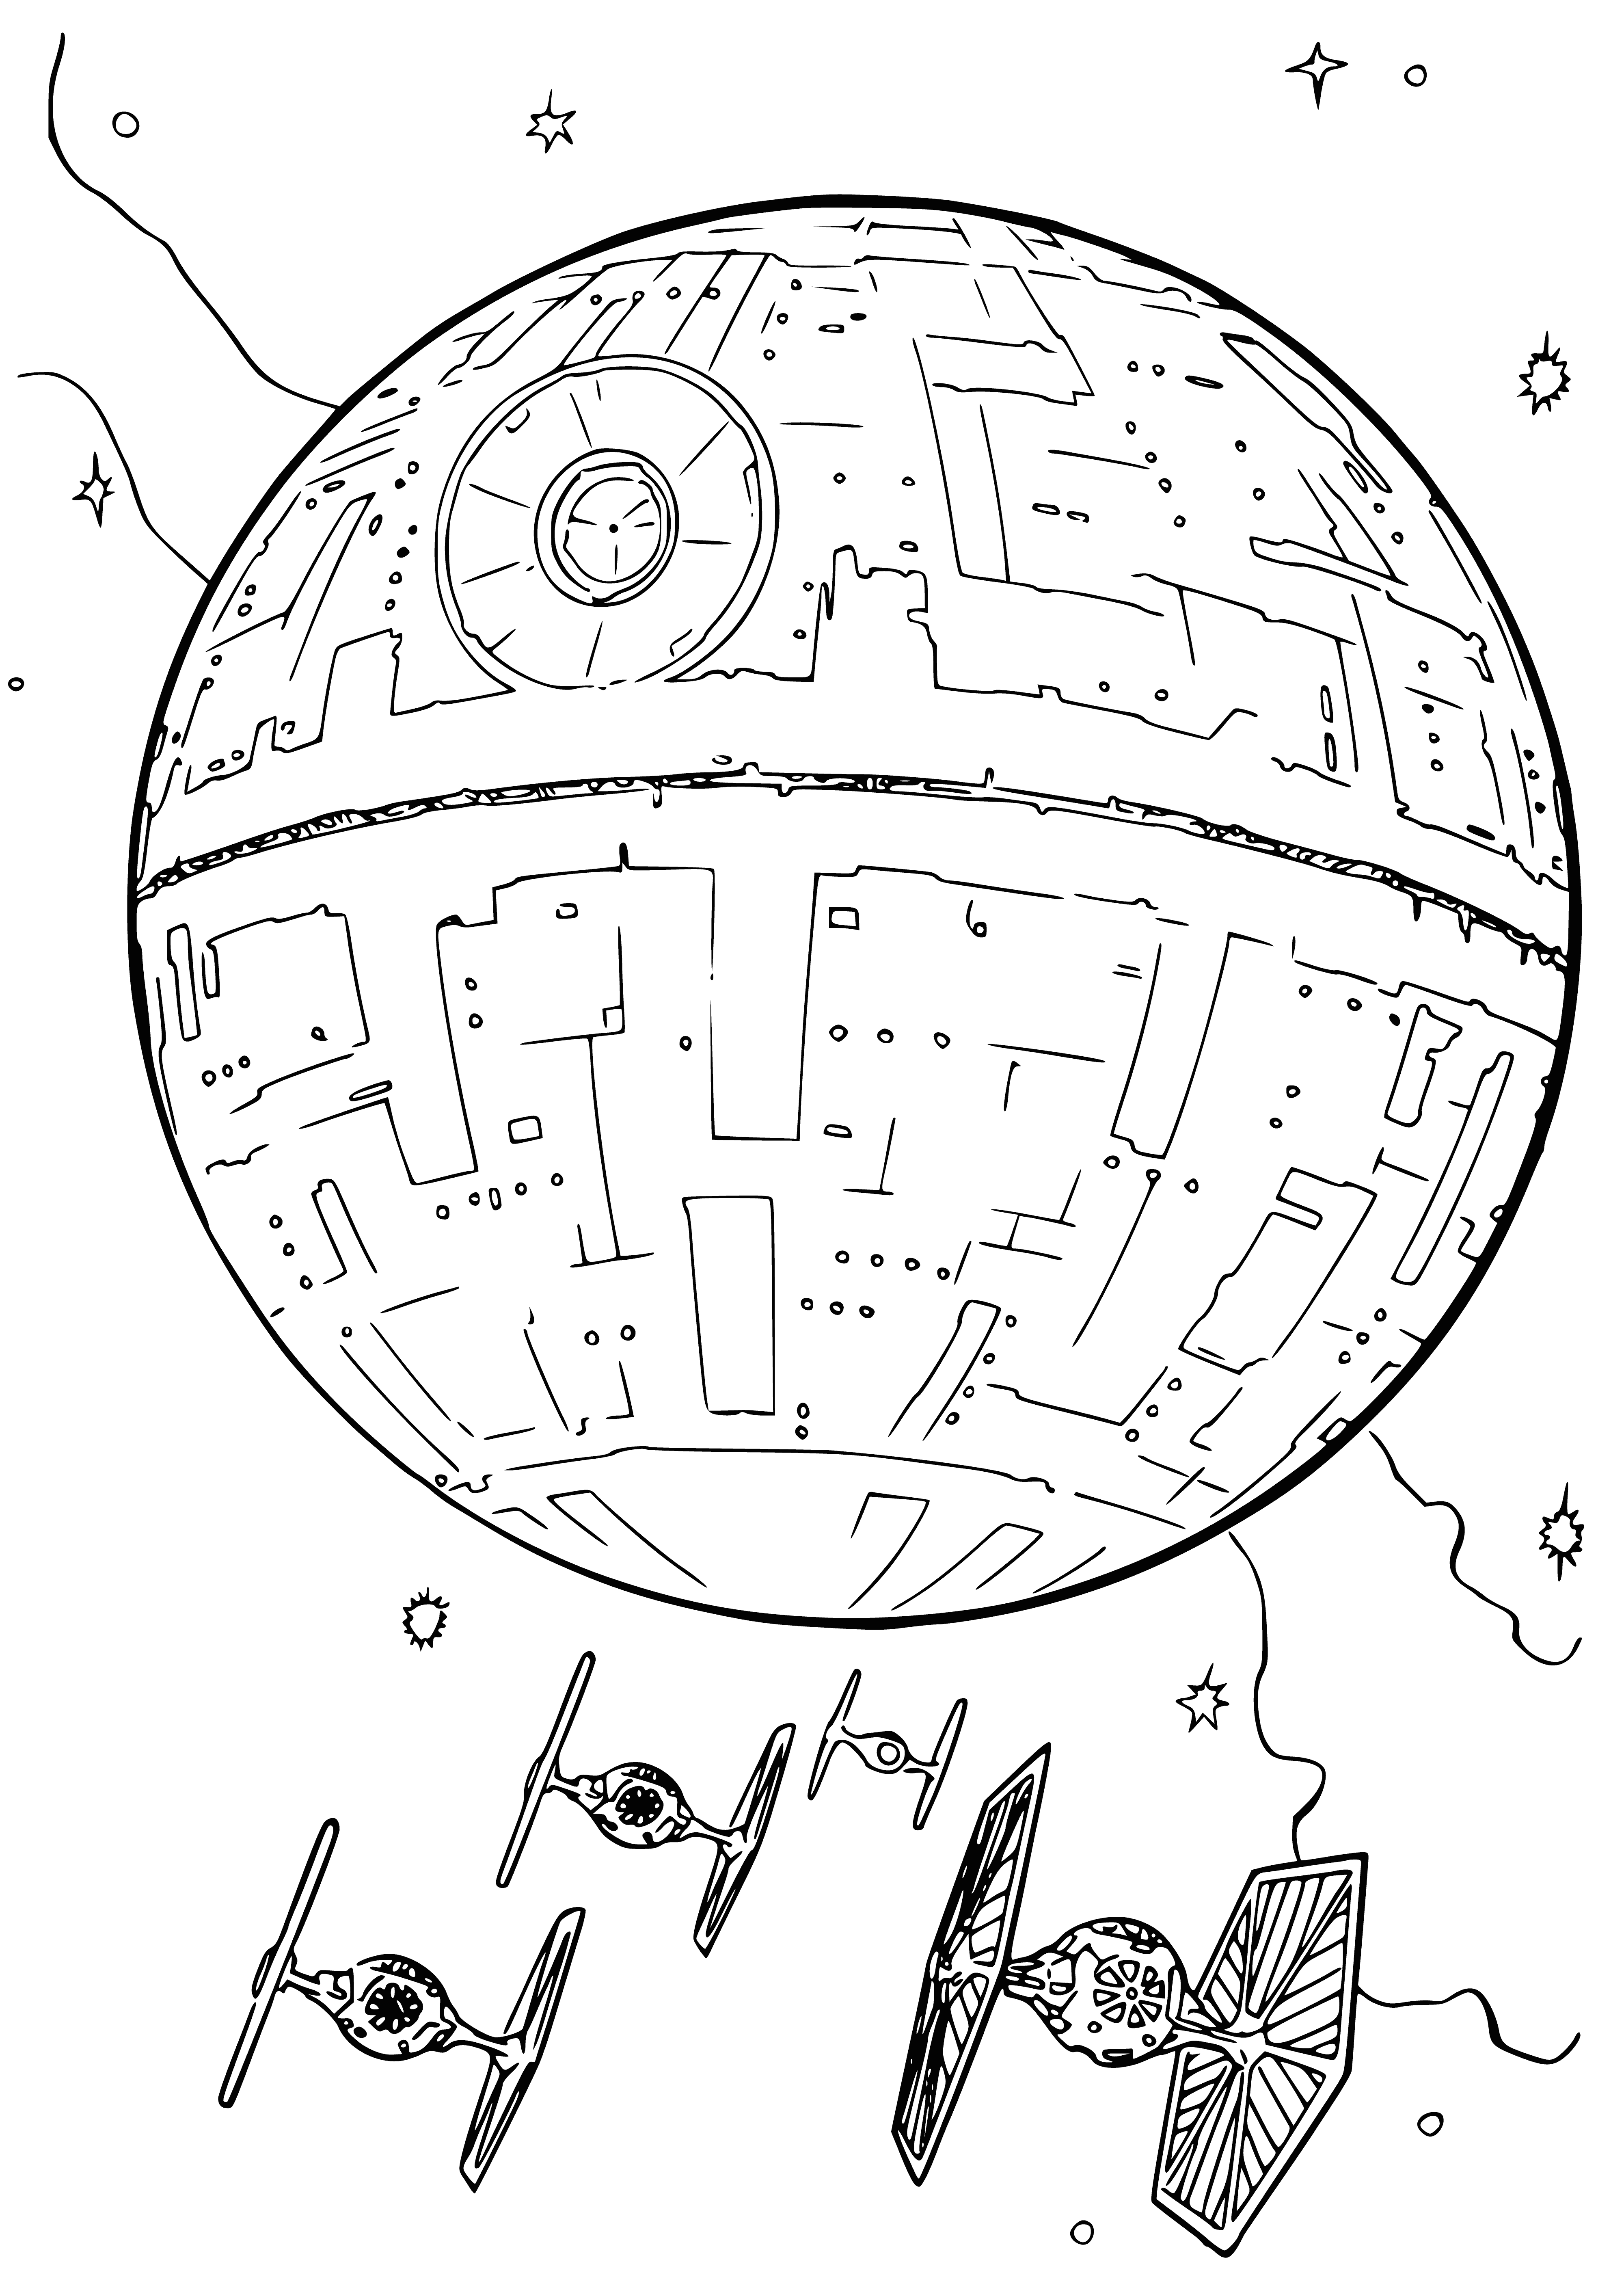 coloring page: Rebels battle Death Star: explosions seen on massive space station's surface as small alliance of ships attack.